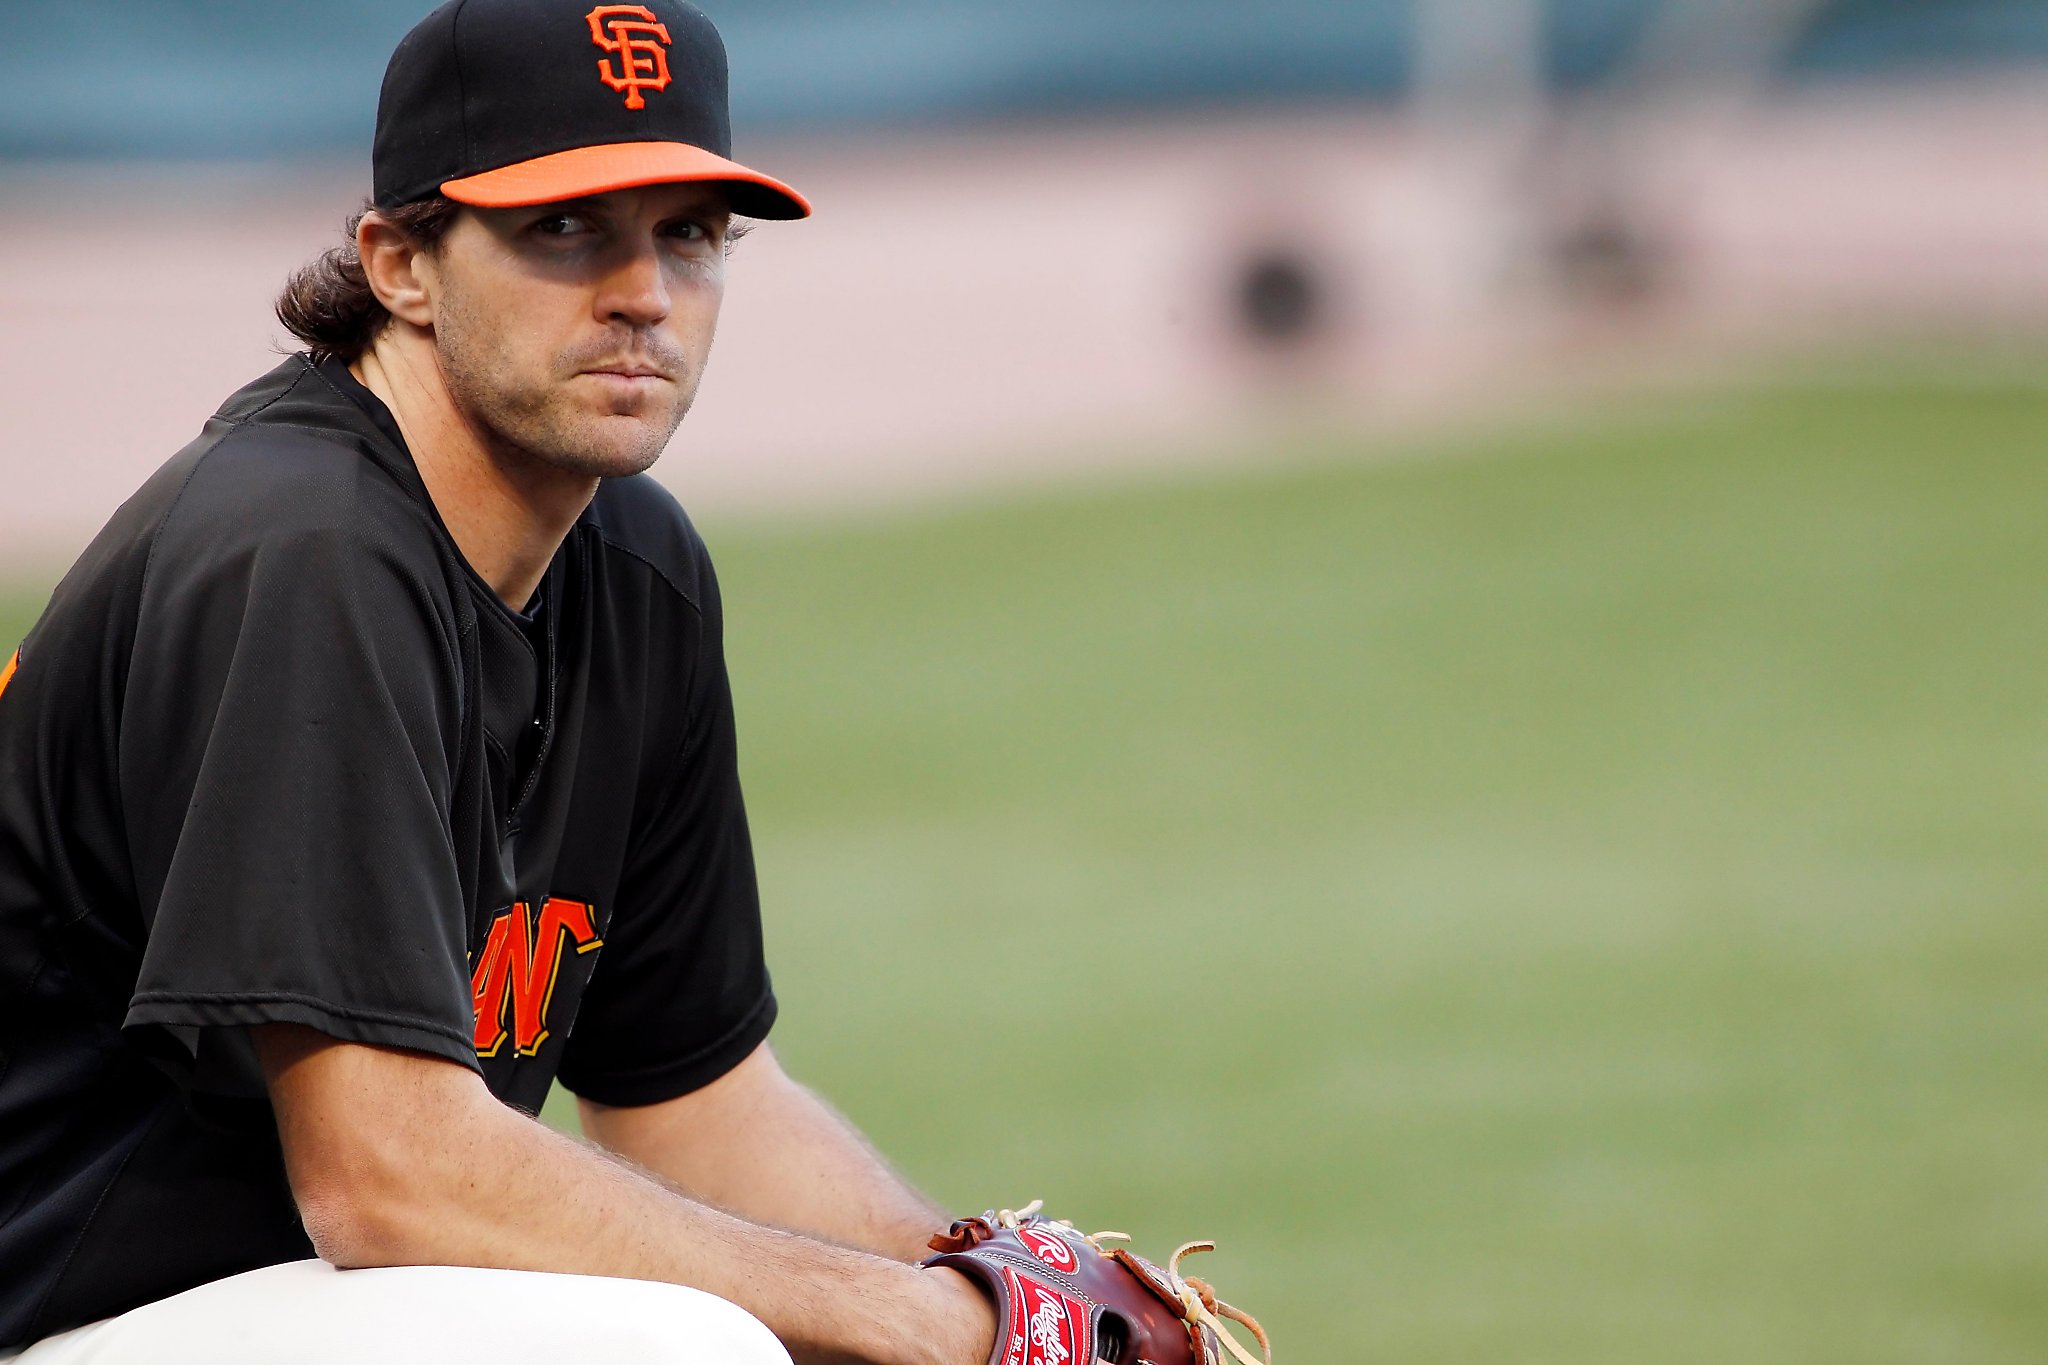 Barry Zito's memoir reveals he rooted against Giants in 2010 World Series